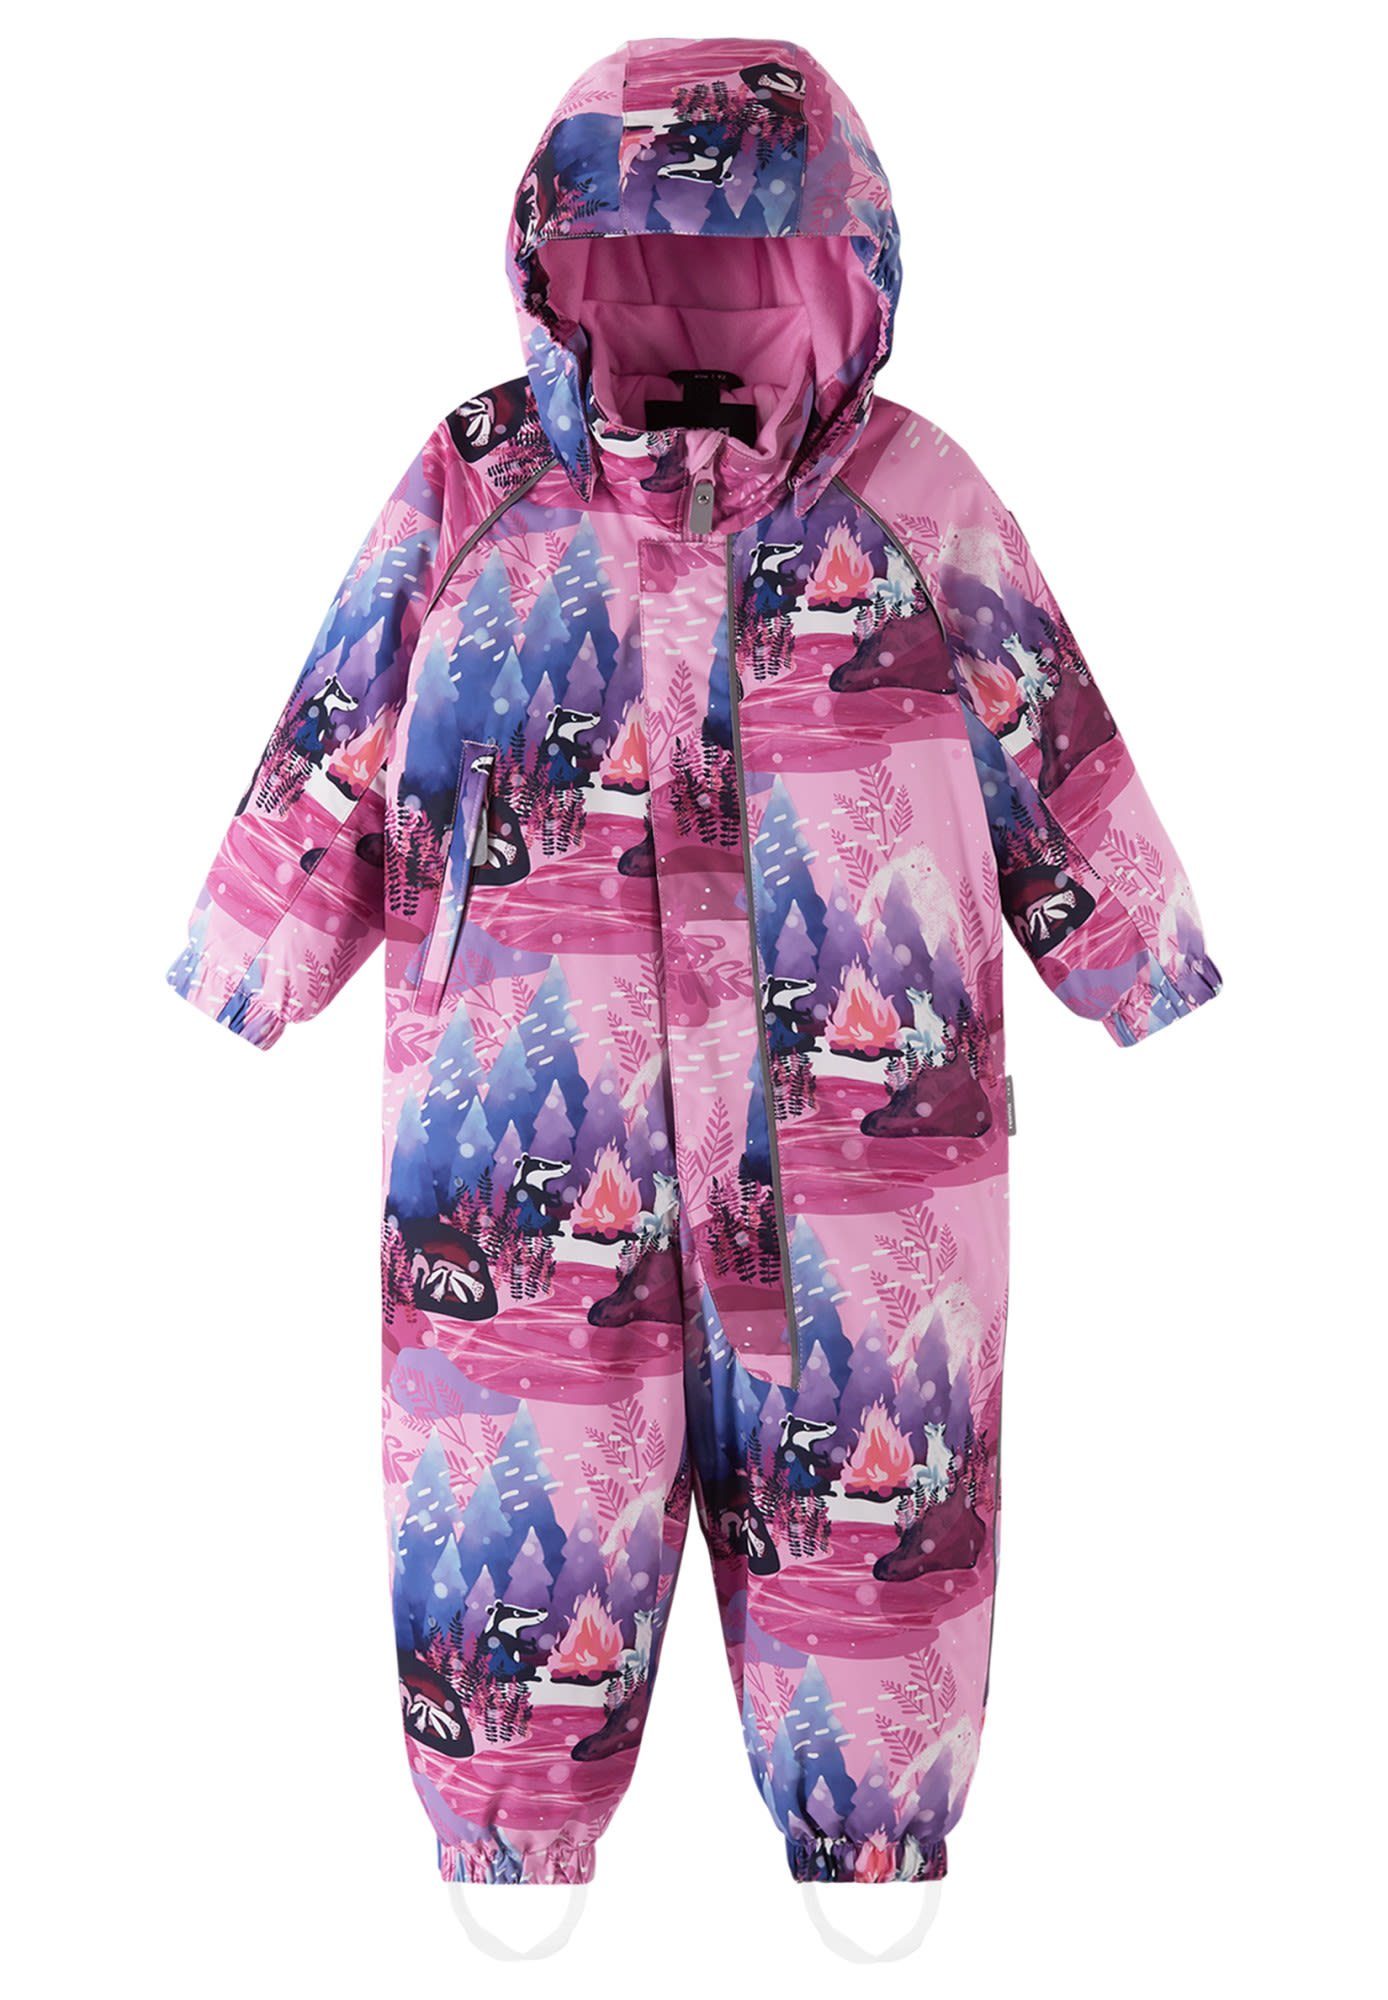 reima Overall Reima Toddlers Langnes Winter Overall Kinder Classic Pink